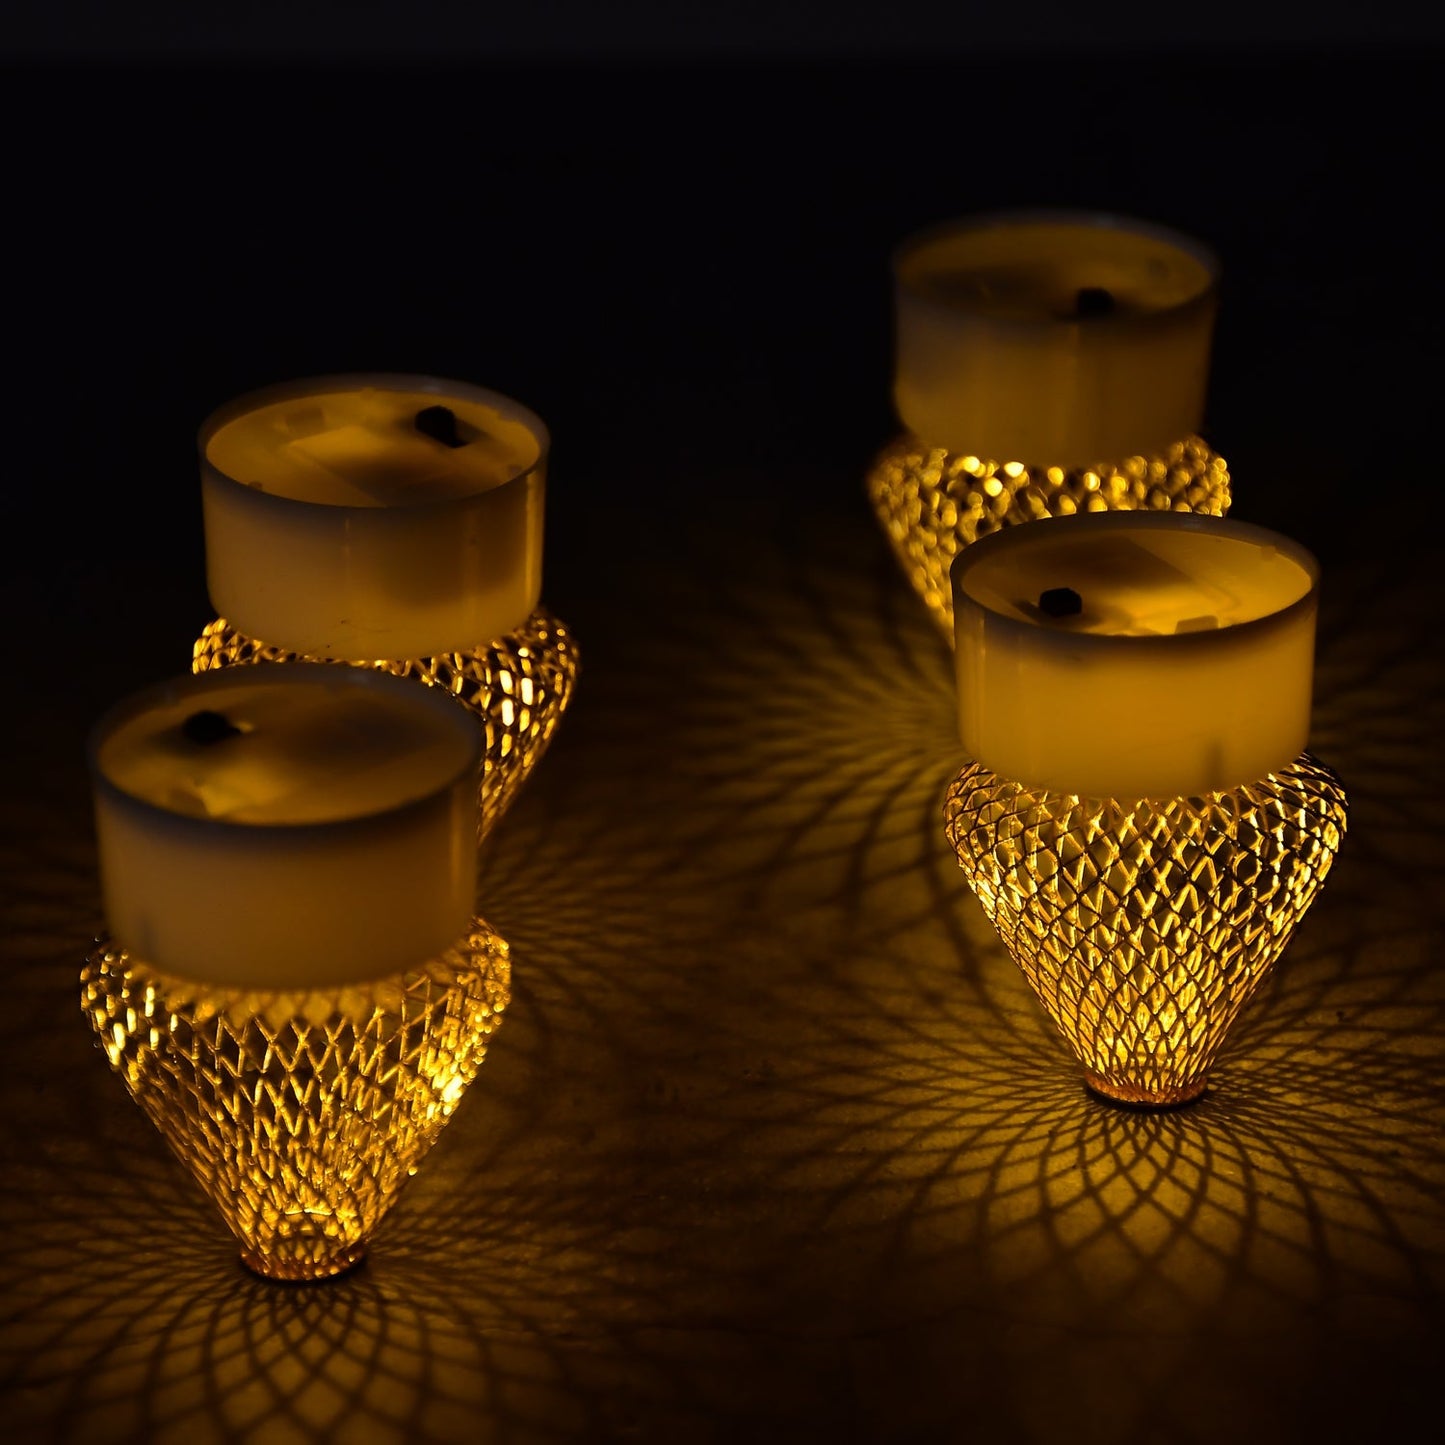 6551 12Pcs Flameless and Smokeless Decorative Candles Acrylic Led Tea Light Candle for Gifting, House, Light for Balcony, Room, Birthday, christmas, Festival, Events Decor Candles (12 Pieces) DeoDap